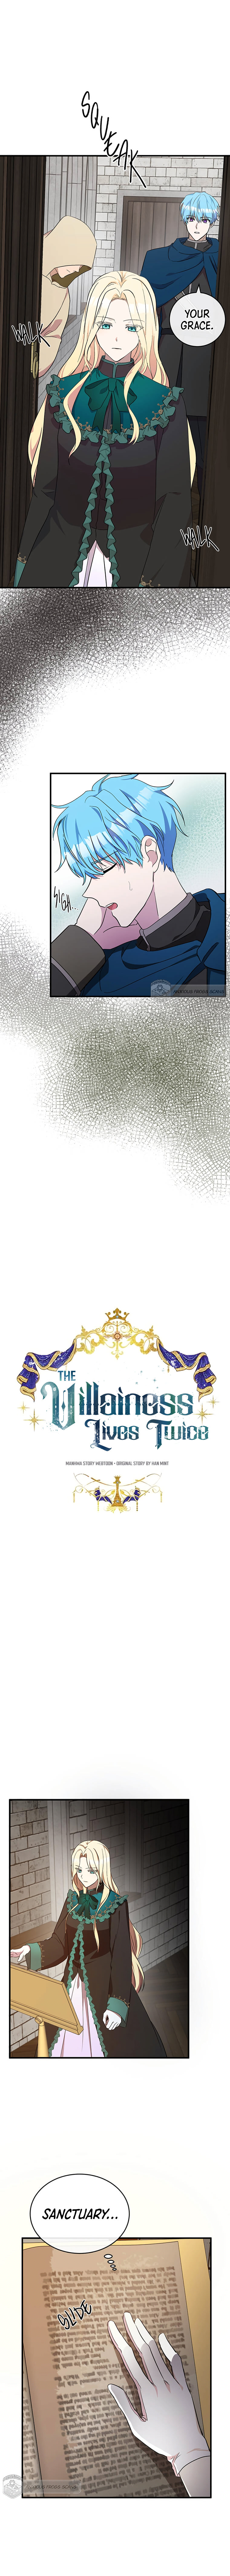 The Villainess Lives Twice - Chapter 94 Page 4